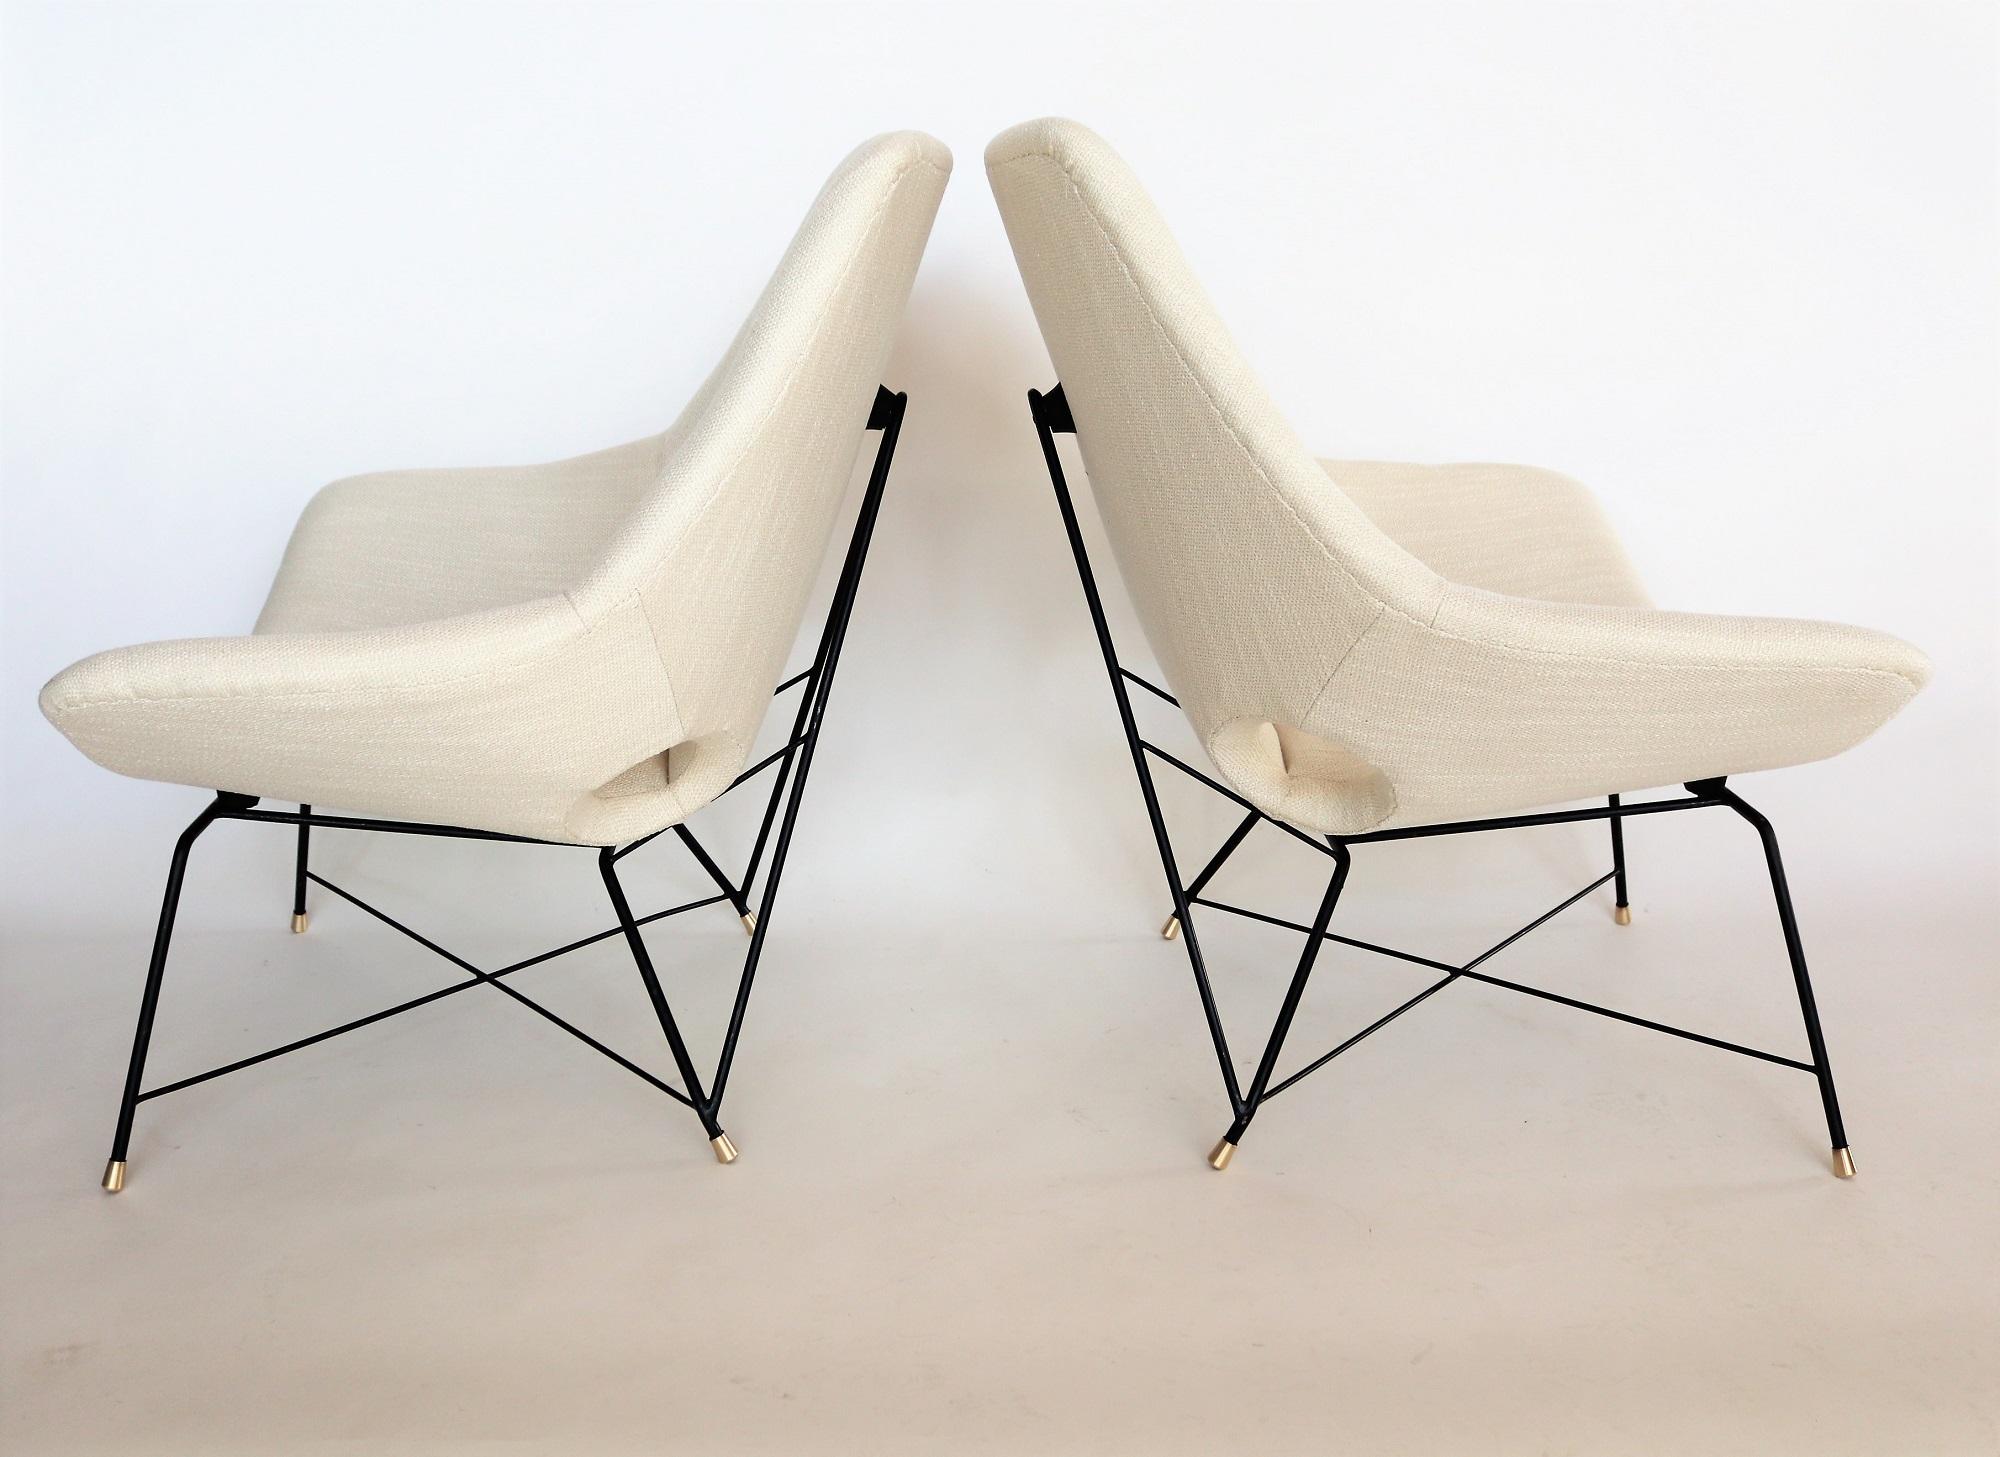 Magnificent pair of original armchairs or lounge chairs designed by Augusto Bozzi in 1954 and produced from Saporiti Italia, Northern Italy during the 1950s.
With original label from the manufacturer.
Both chairs have been completely restored with